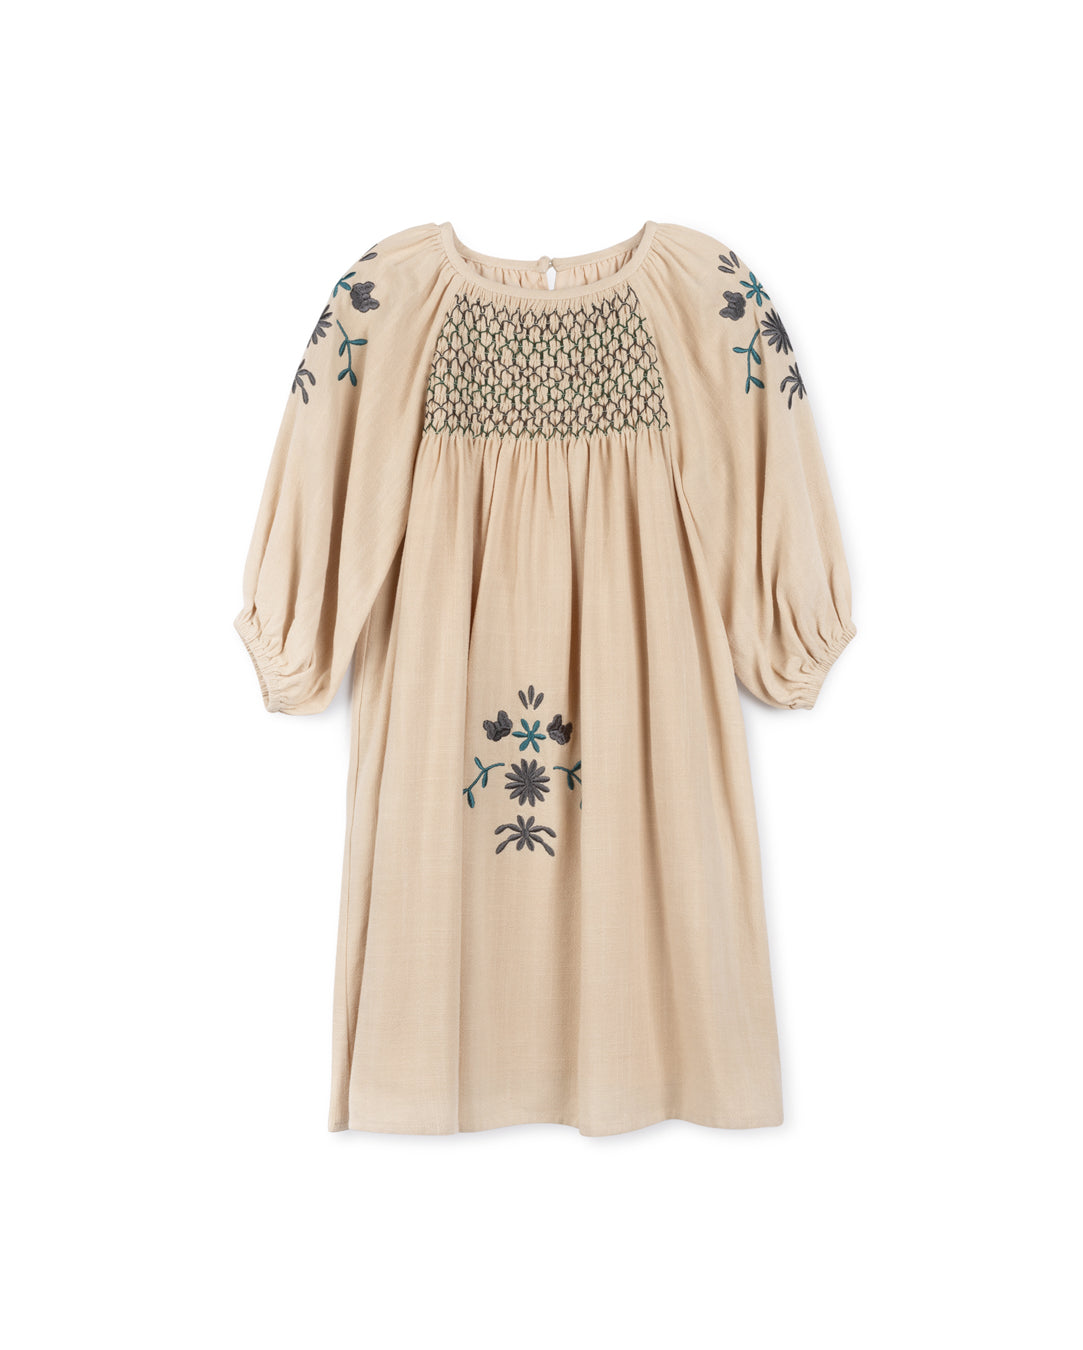 LILOU TAN EMBROIDERED FLOWER SMOCKED DRESS